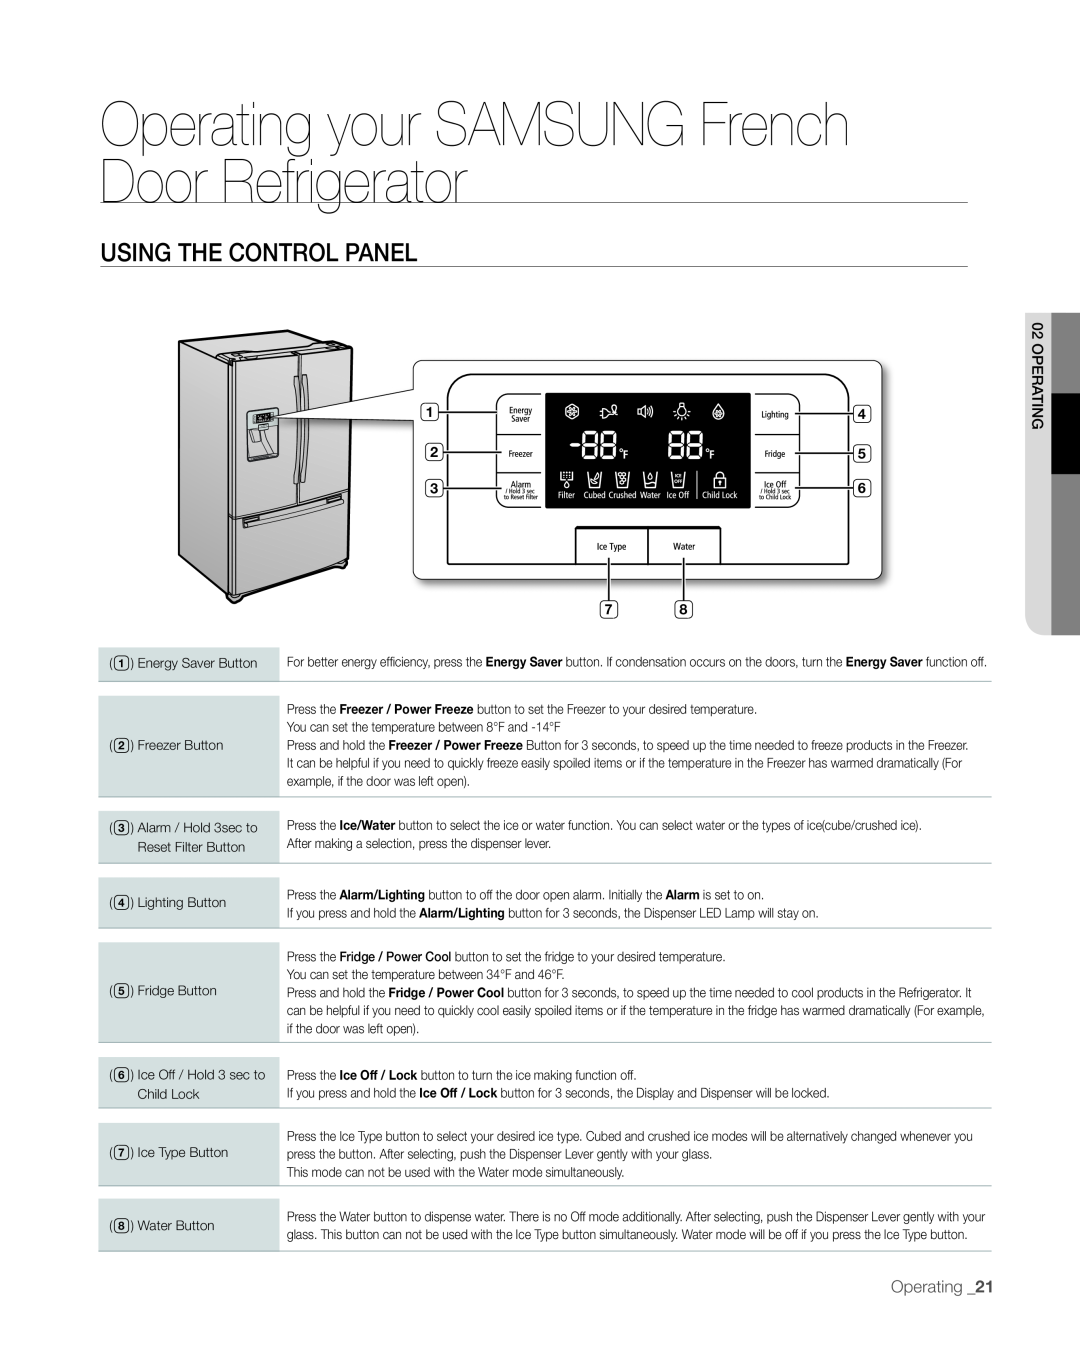 Sears RFG297AA manual Operating your SAMSUNG French Door Refrigerator, Using the control panel 